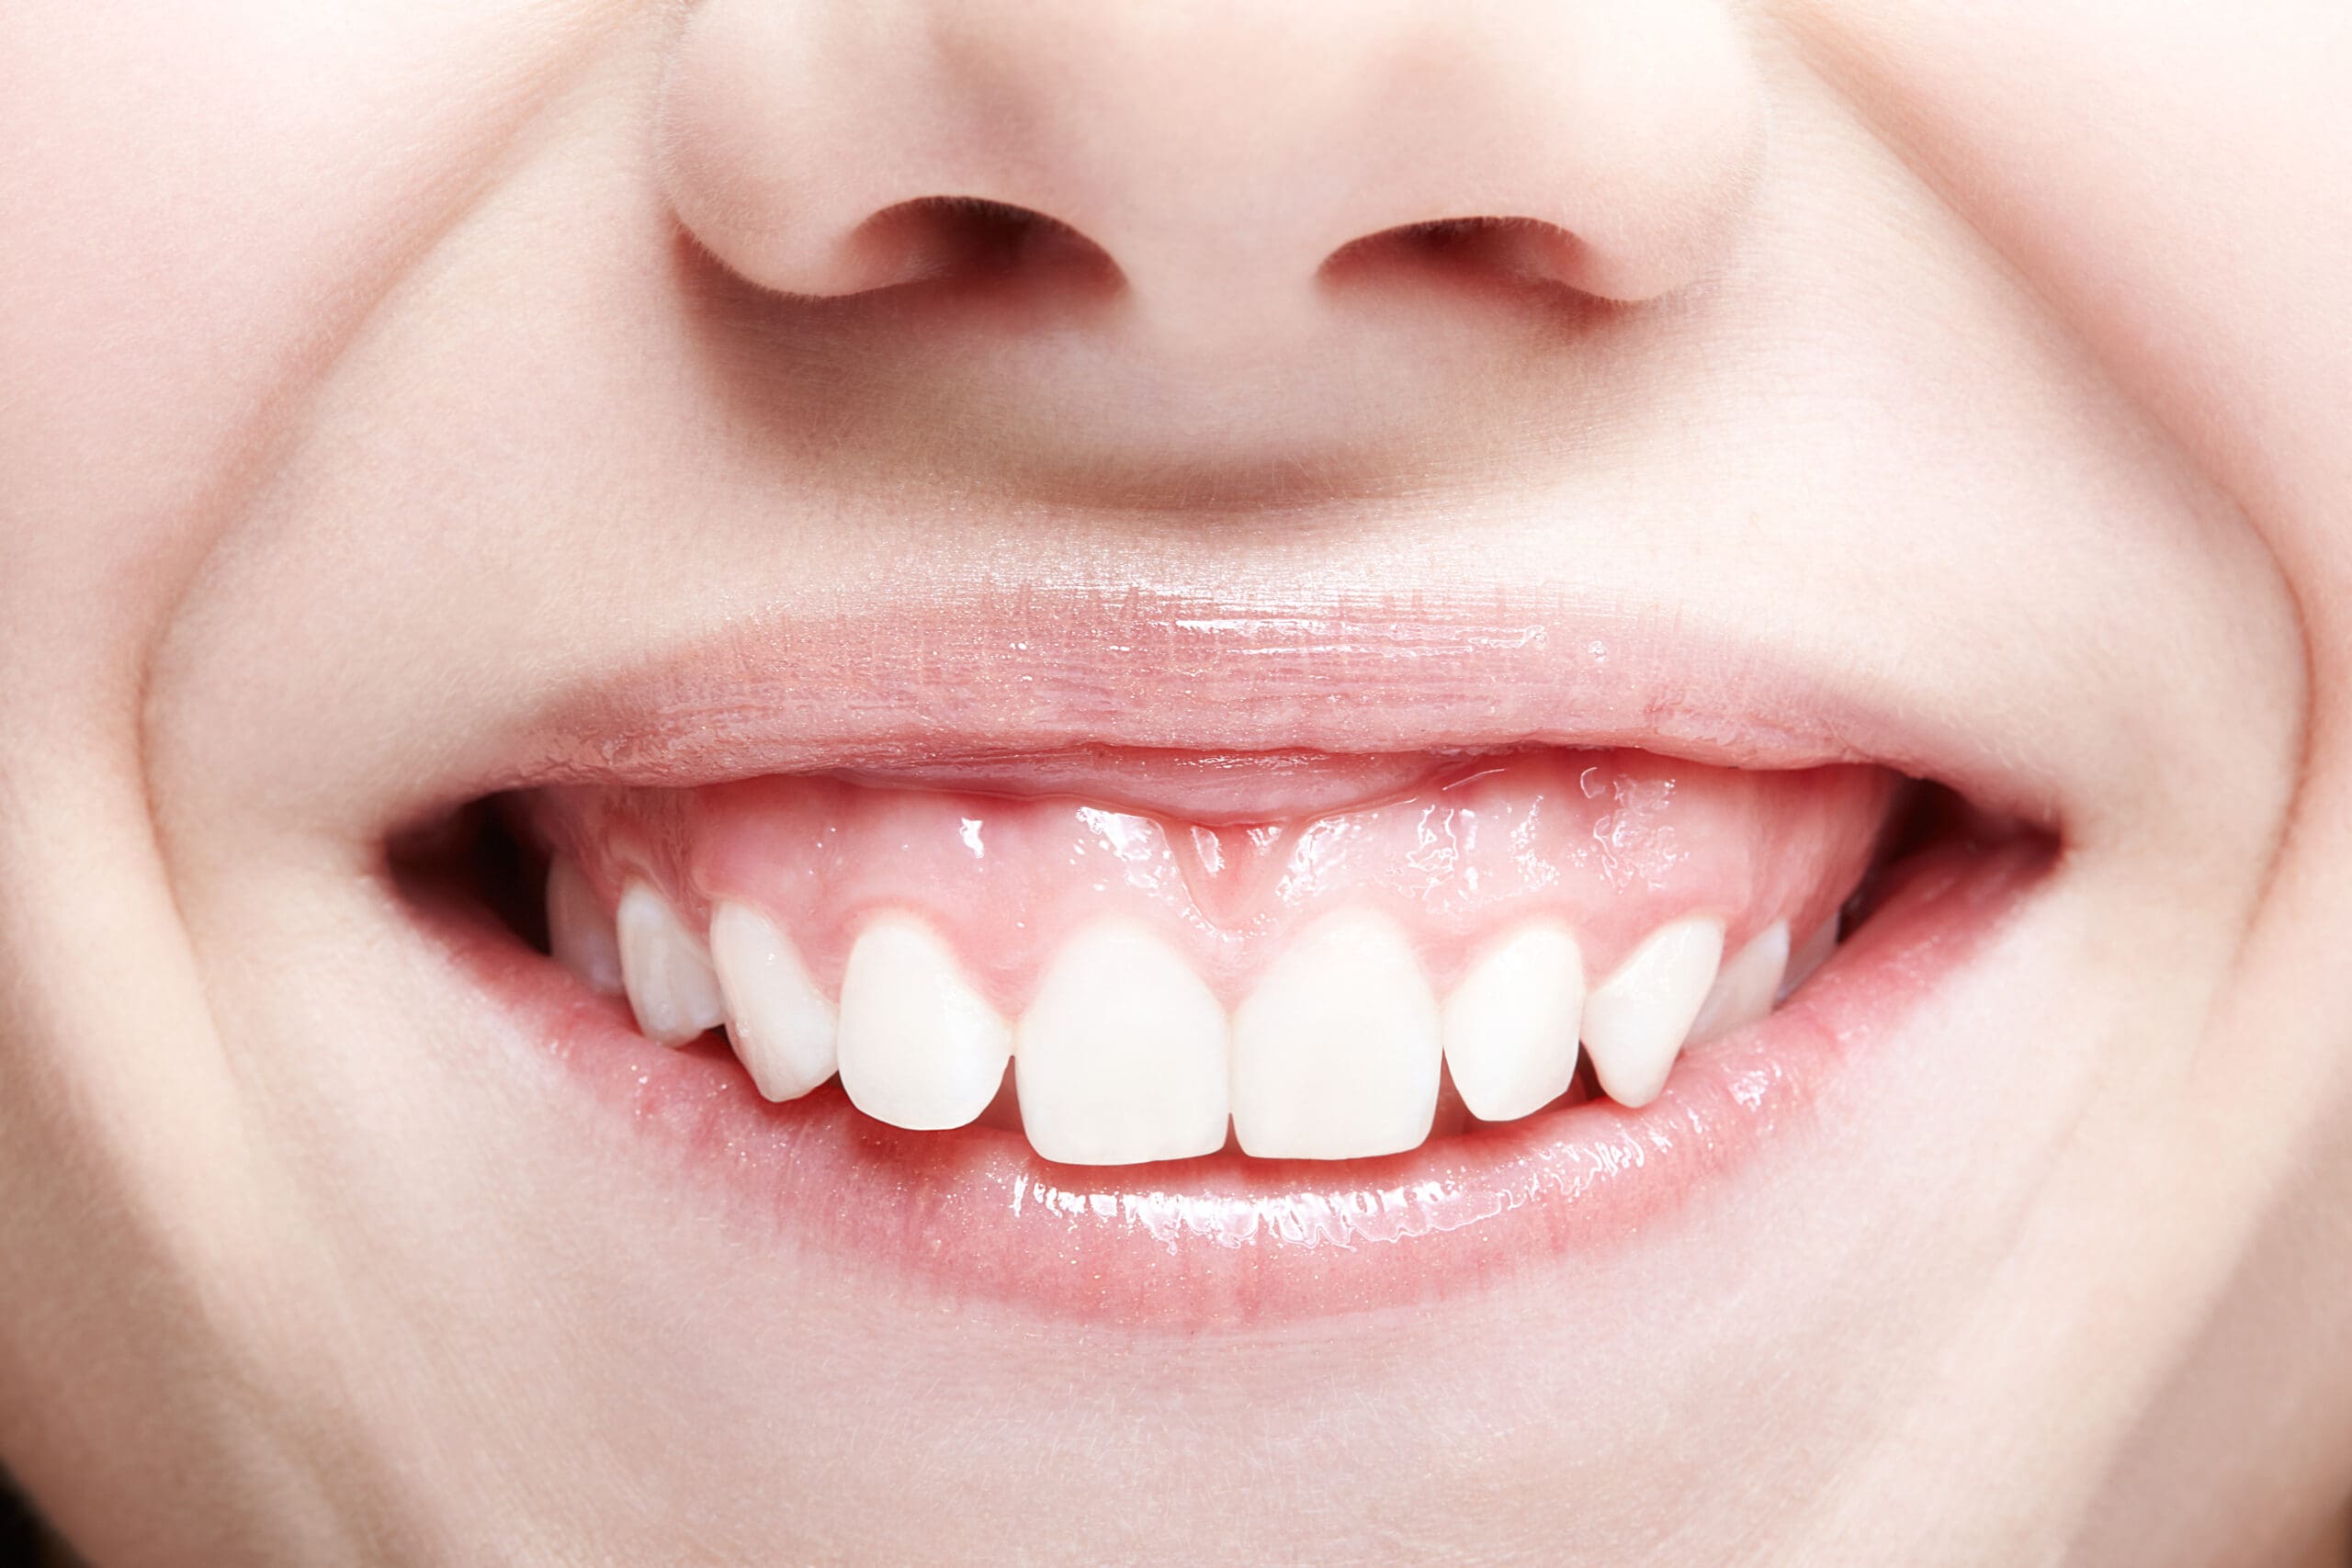 A close-up of a woman's mouth showcasing white teeth after a gum lift.